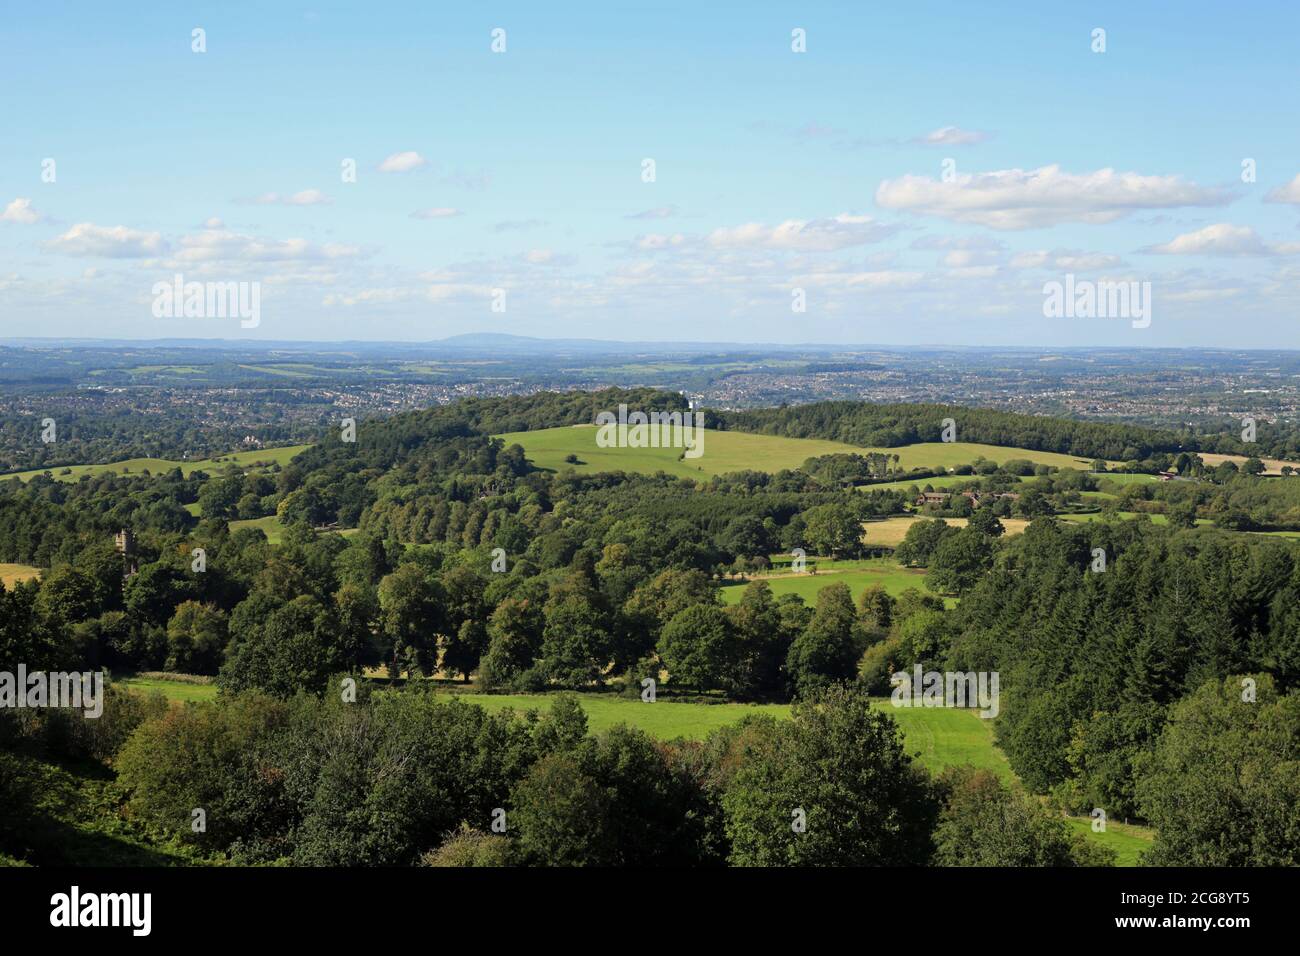 View of Wychbury hill from the Clent hills, Worcestershire, England, UK. Stock Photo